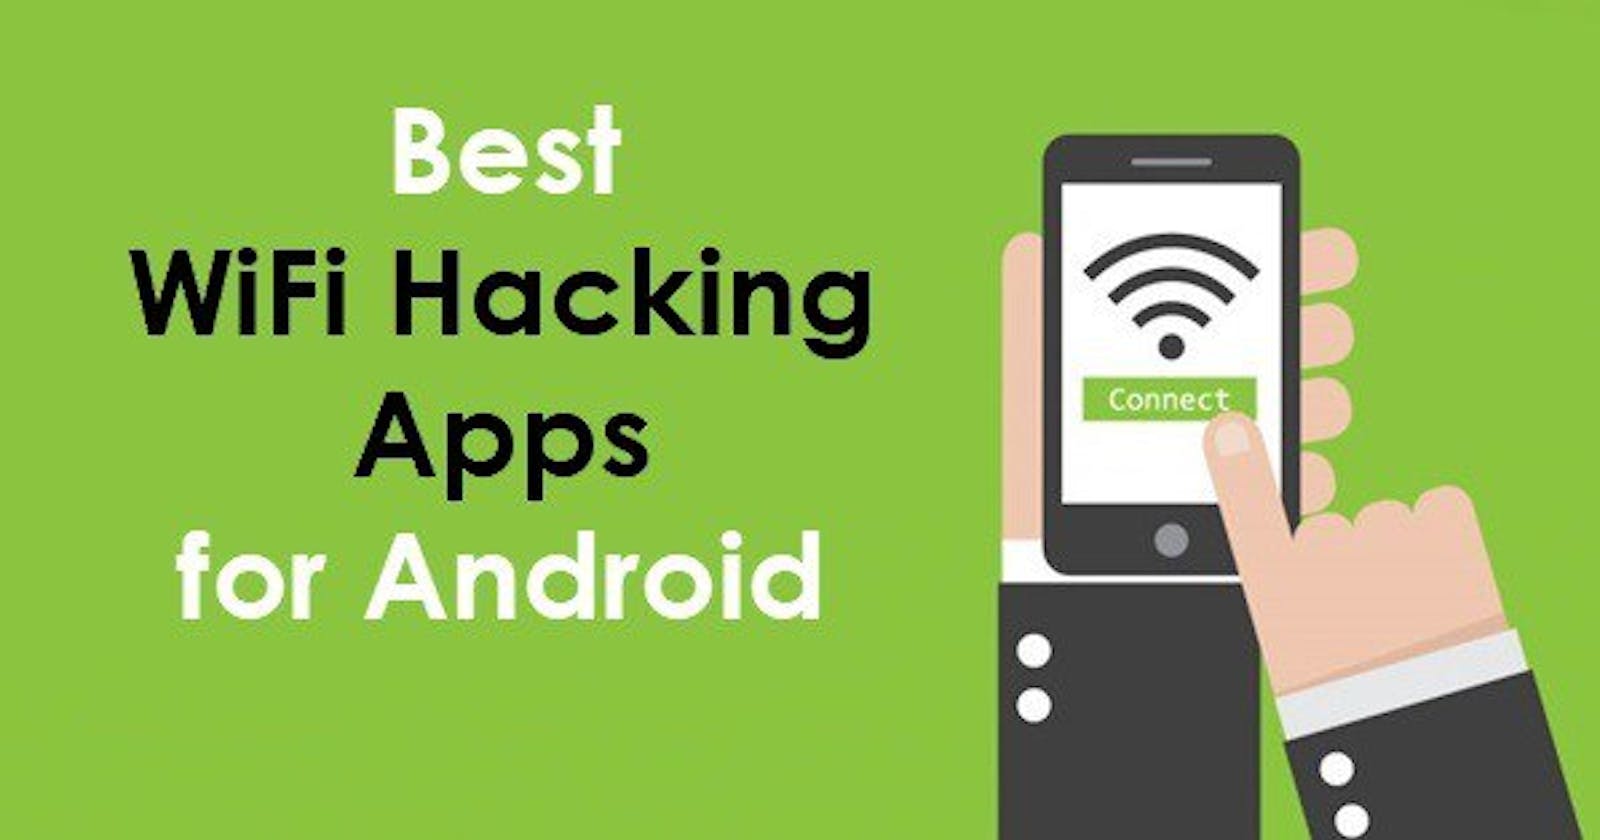 12 Best Wi-Fi Hacking Apps For Android.